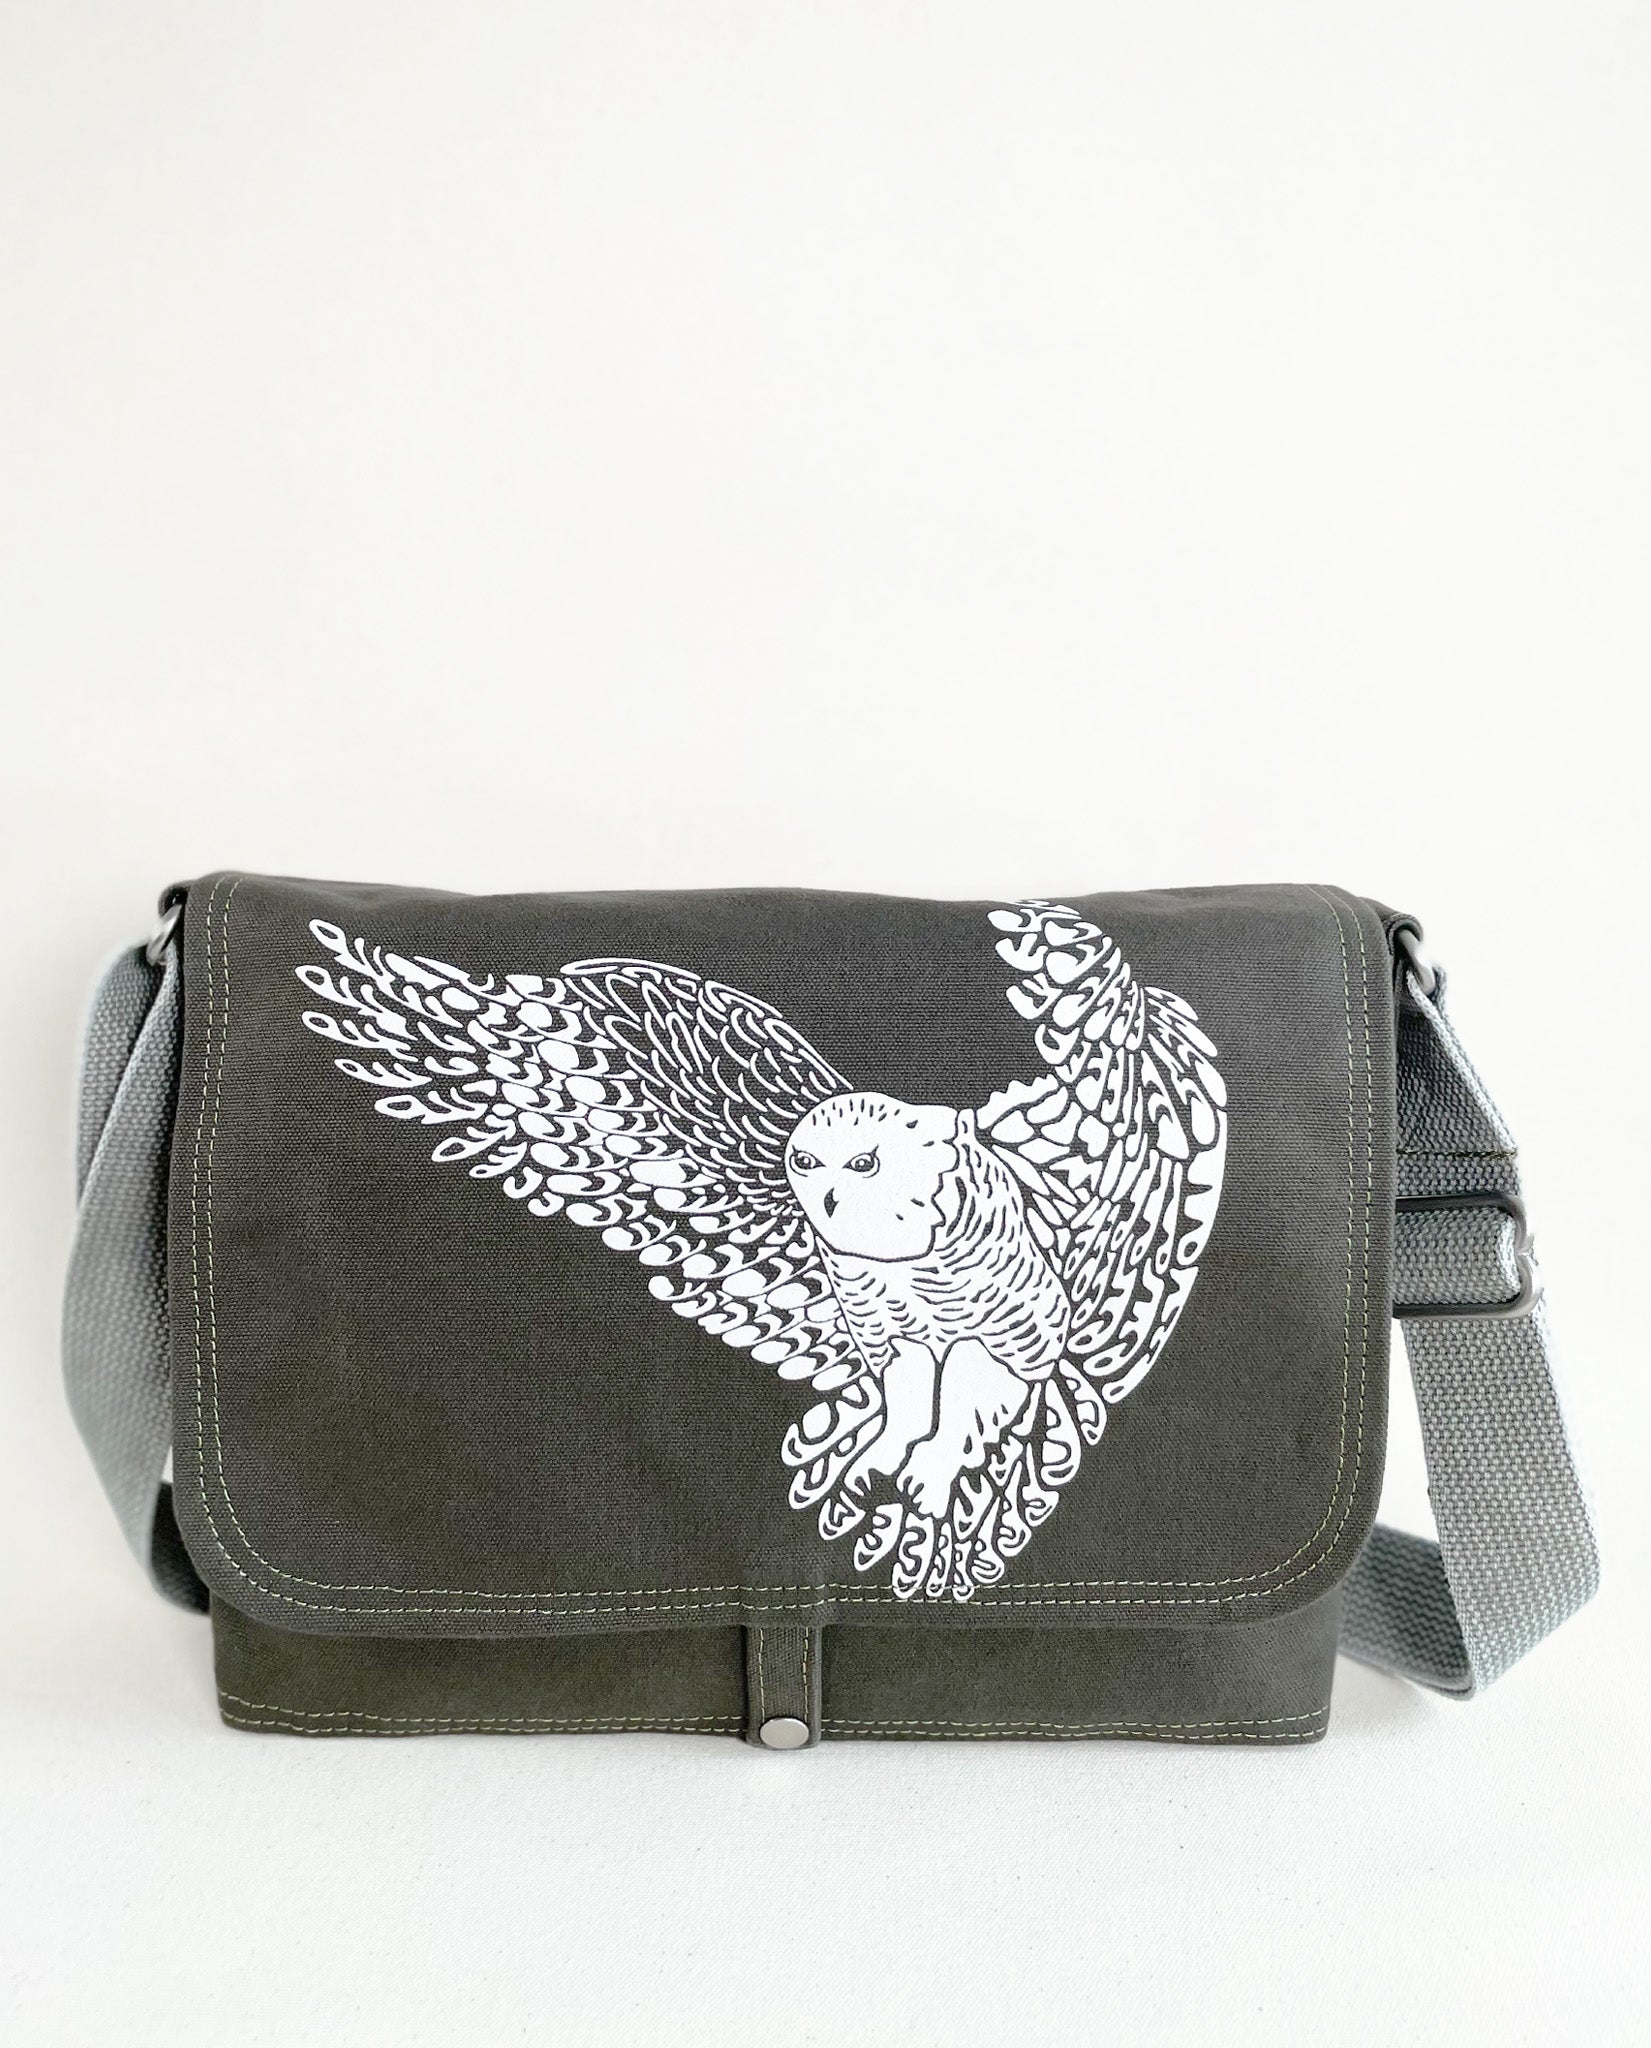 Front exterior of Dock 5’s Snowy Owl Canvas Messenger Bag in olive featuring art from owner Natalija Walbridge